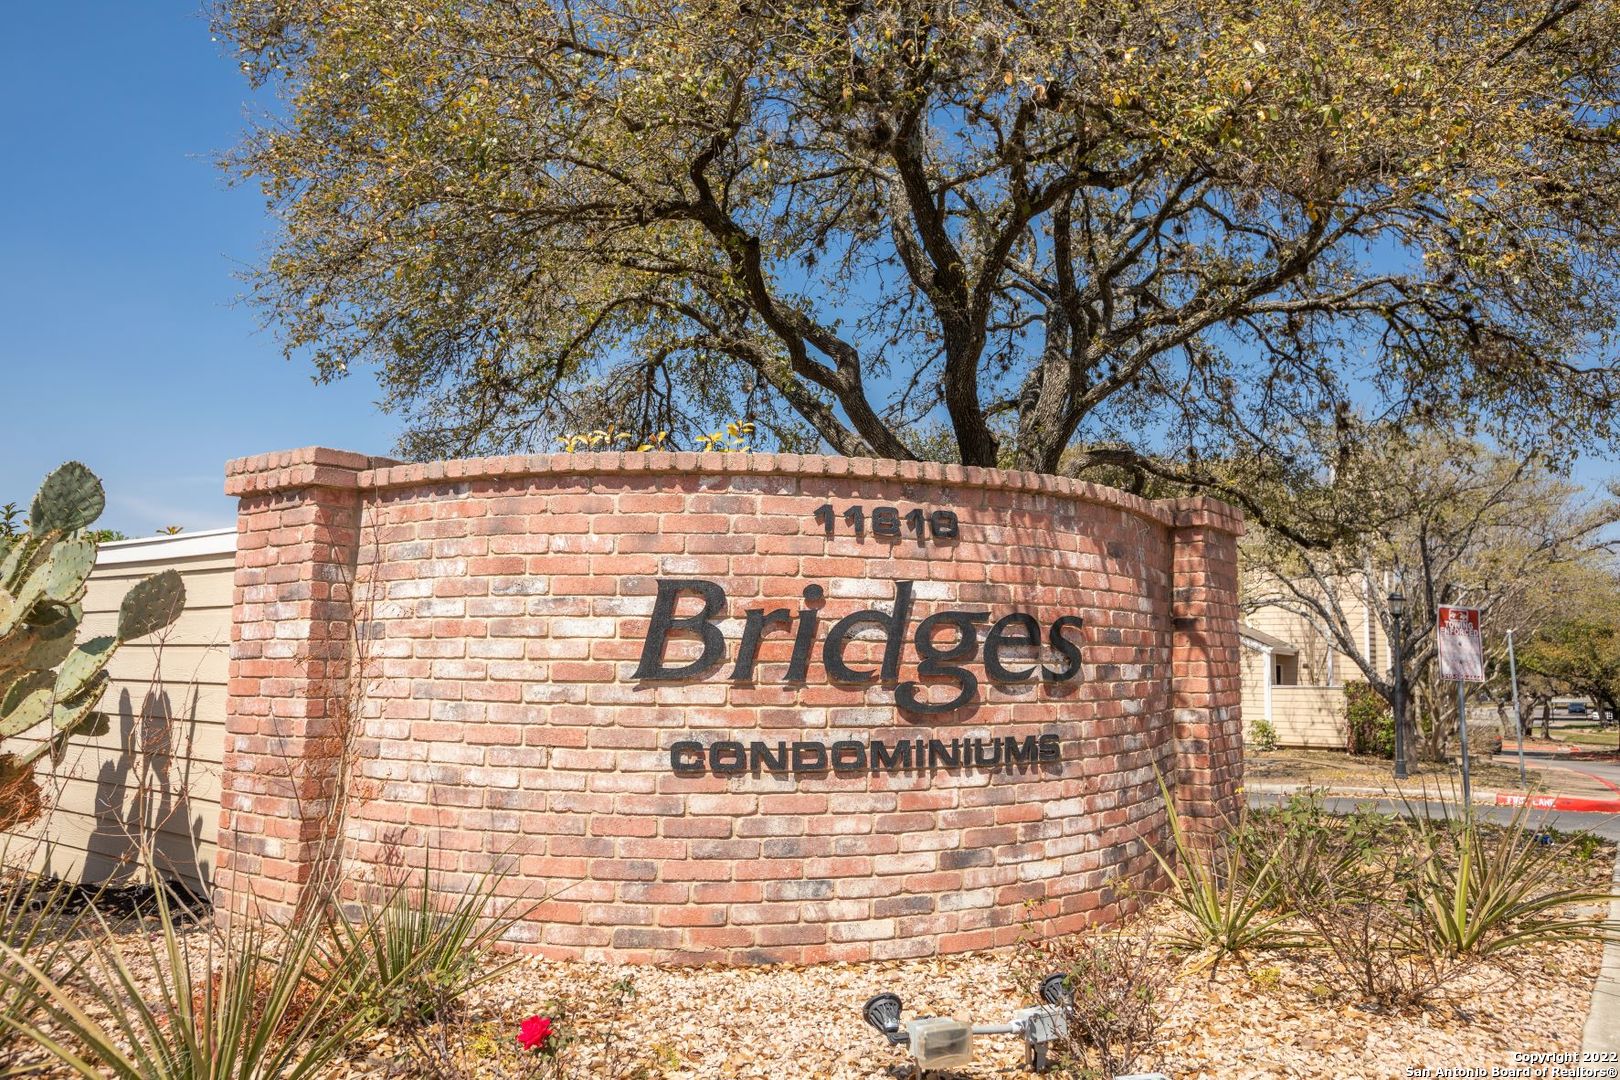 LOCATION**Ground Level unit in The Bridges community**Located between Huebner and Wurzbach, well maintained and improved unit, Ready for new Owner**Community features well cared for grounds and nice amenities**Easy access to great Shopping and Dining opportunities**Priced to Sell, better hurry and schedule your viewing